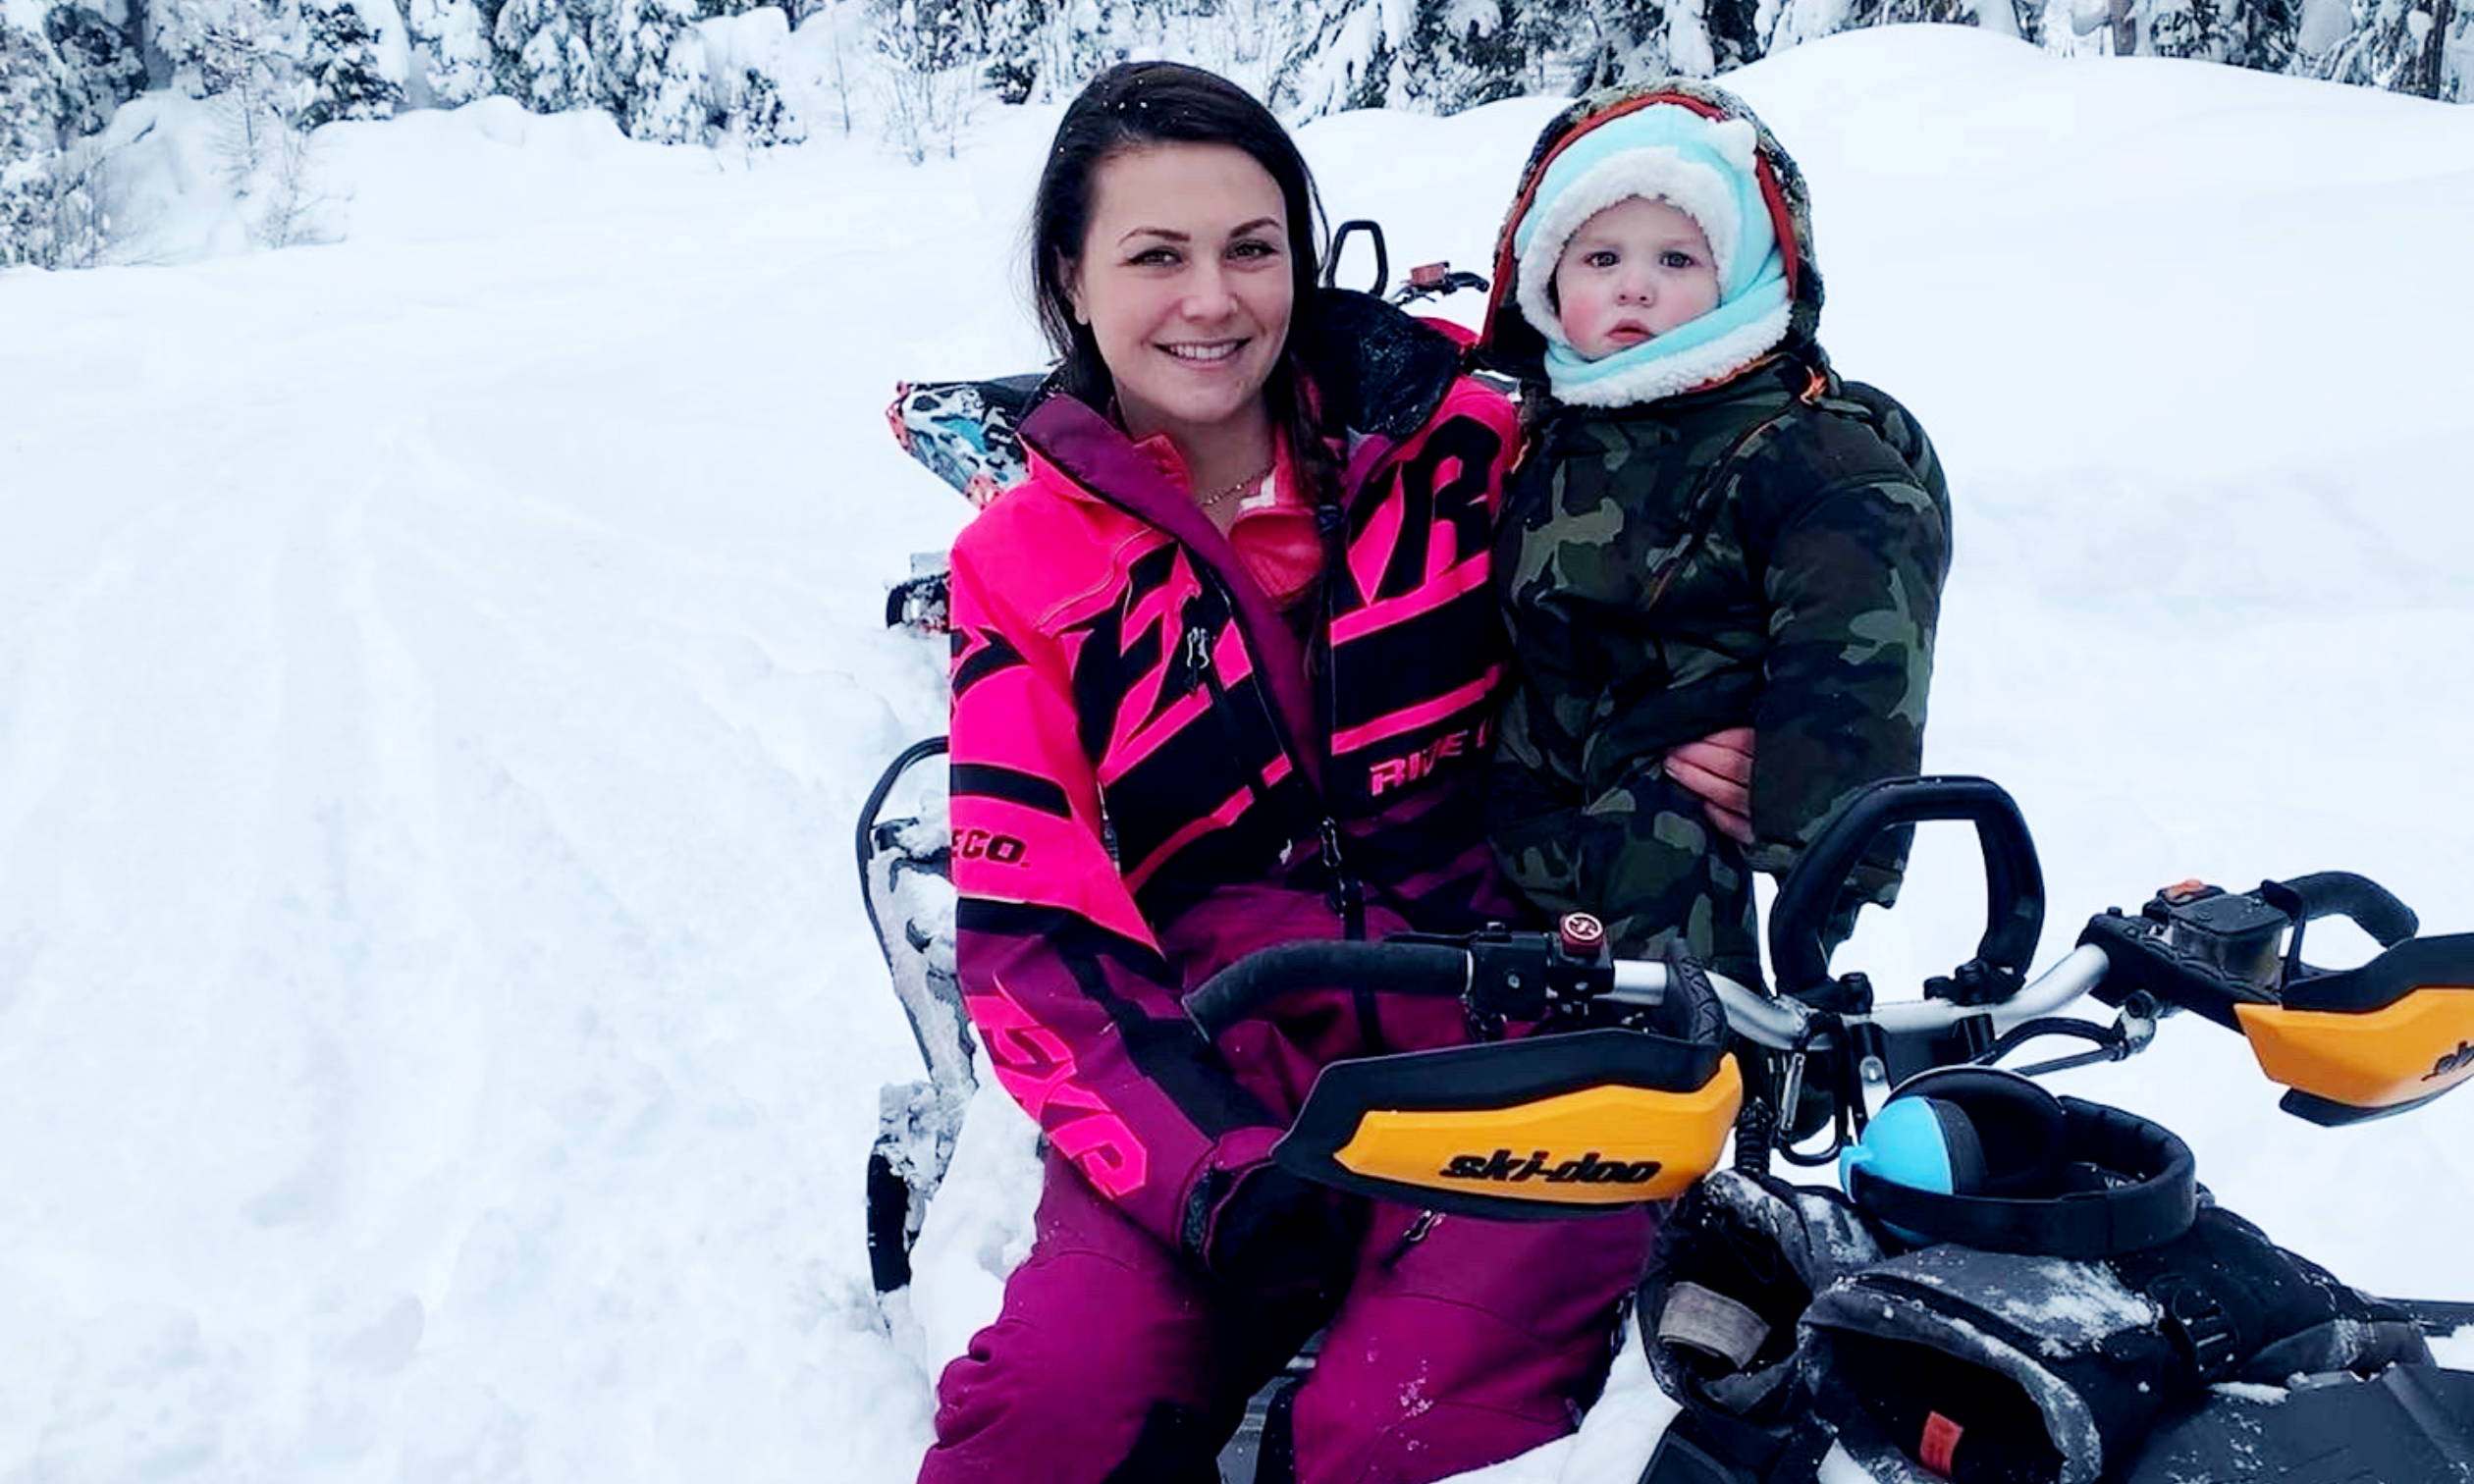 Shelby Ingram wears a pink snowsuit while sitting on a snowmobile with her one-year-old son, Mason Chomica.